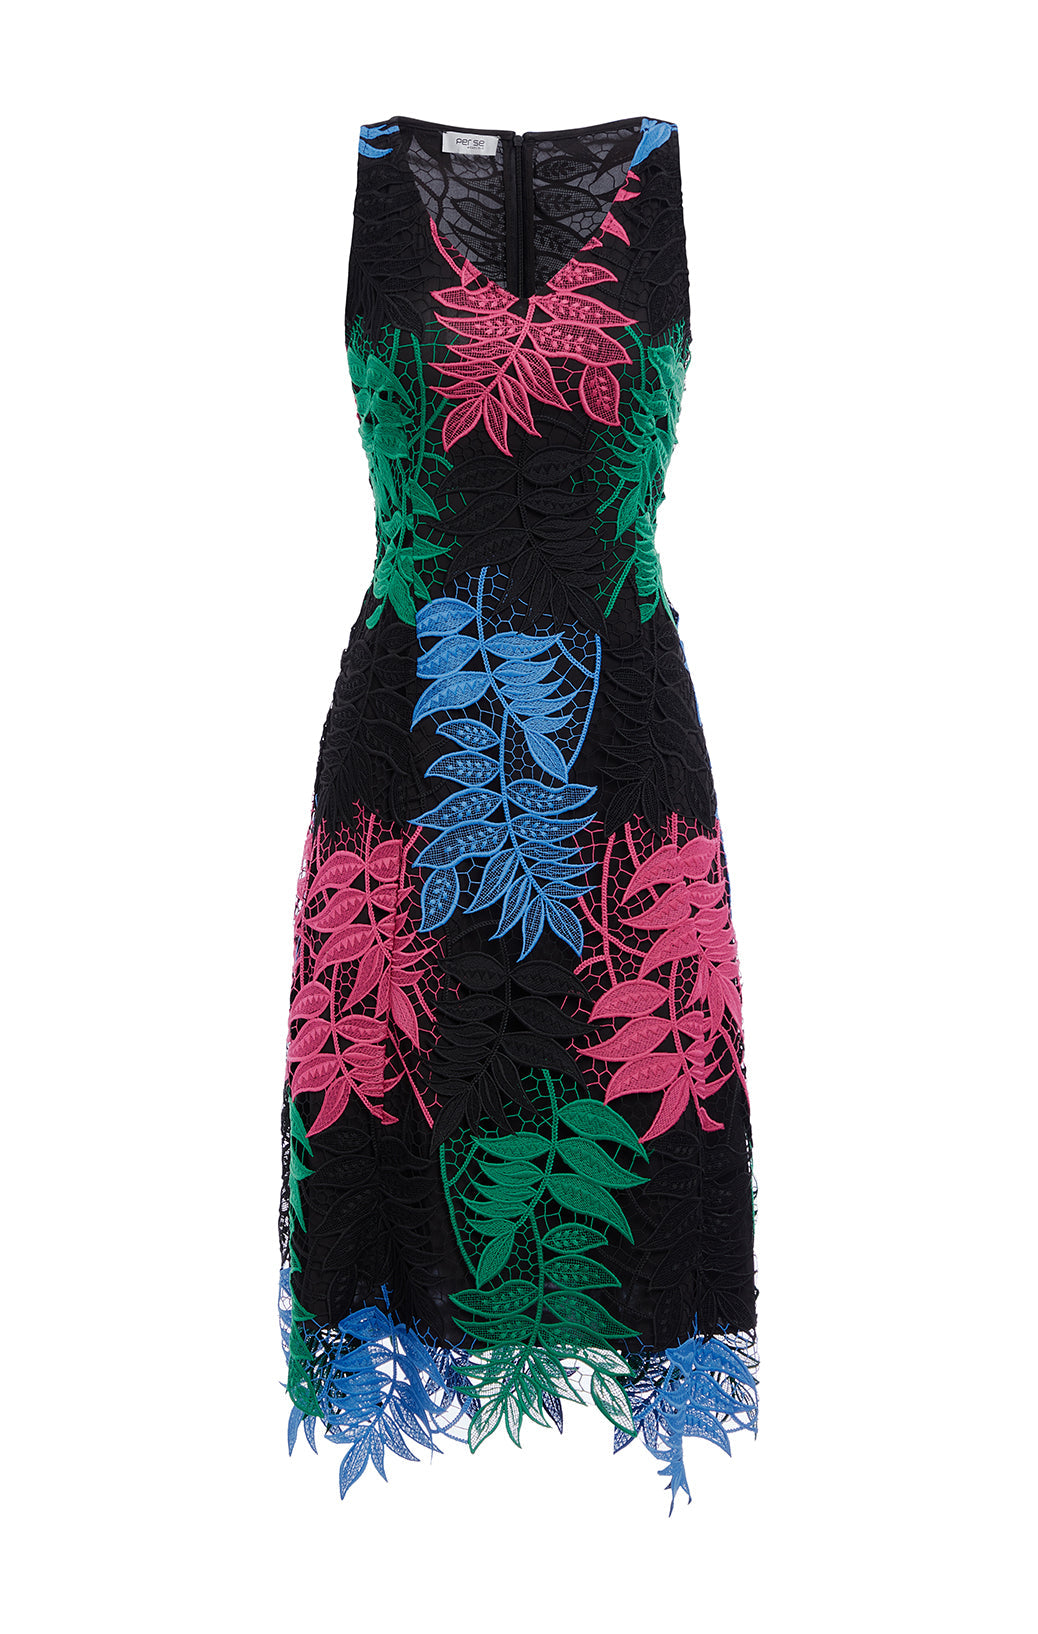 Solarium - Embroidered Floral Cutwork Dress - Product Image